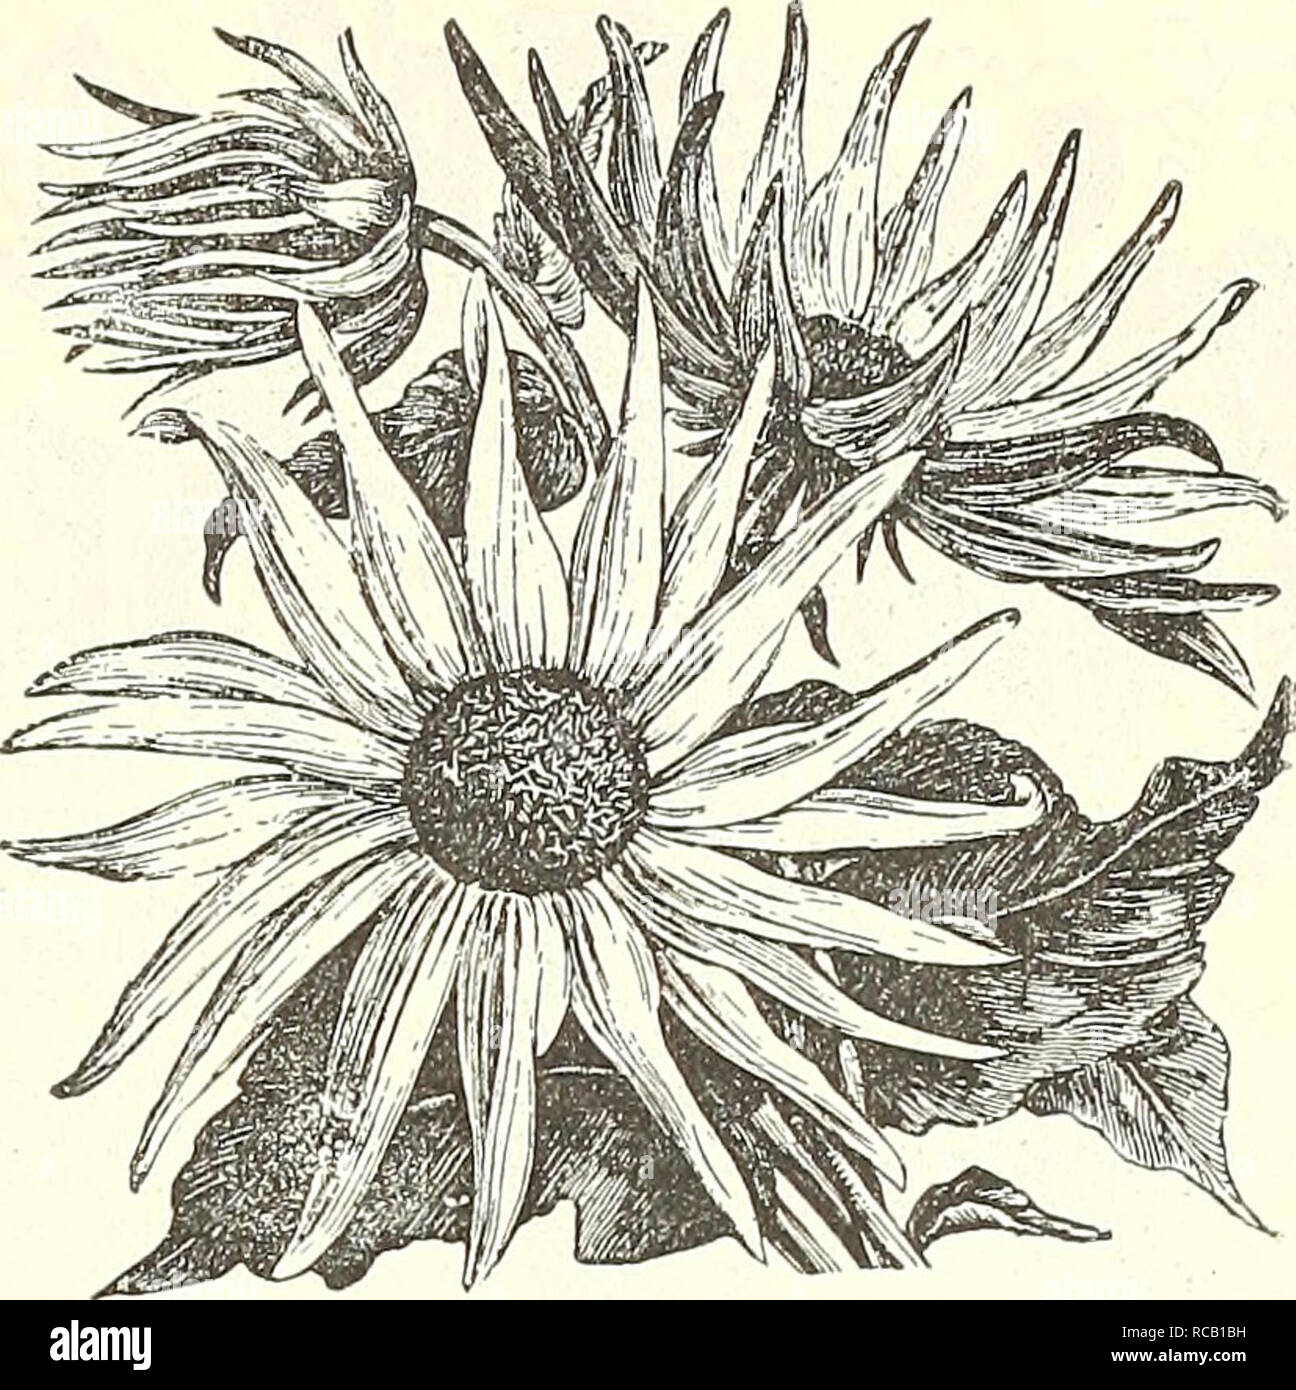 . Dreer's garden book : 1904. Seeds Catalogs; Nursery stock Catalogs; Gardening Equipment and supplies Catalogs; Flowers Seeds Catalogs; Vegetables Seeds Catalogs; Fruit Seeds Catalogs. Sunflower, Okion. black centres and all beauti ful; for cutting they are indis- , pensable 10 2707 — Perkeo. A charmin dwarf variety of the Miniature Sunflower. The plants form compact bushes about 12 in. high by 14 in. through. There are mrny positions, such as the front of borders or beds of plantsof medium height,where this can be used to good ad- vantage, flowering as it does from the end of June unti cut d Stock Photo